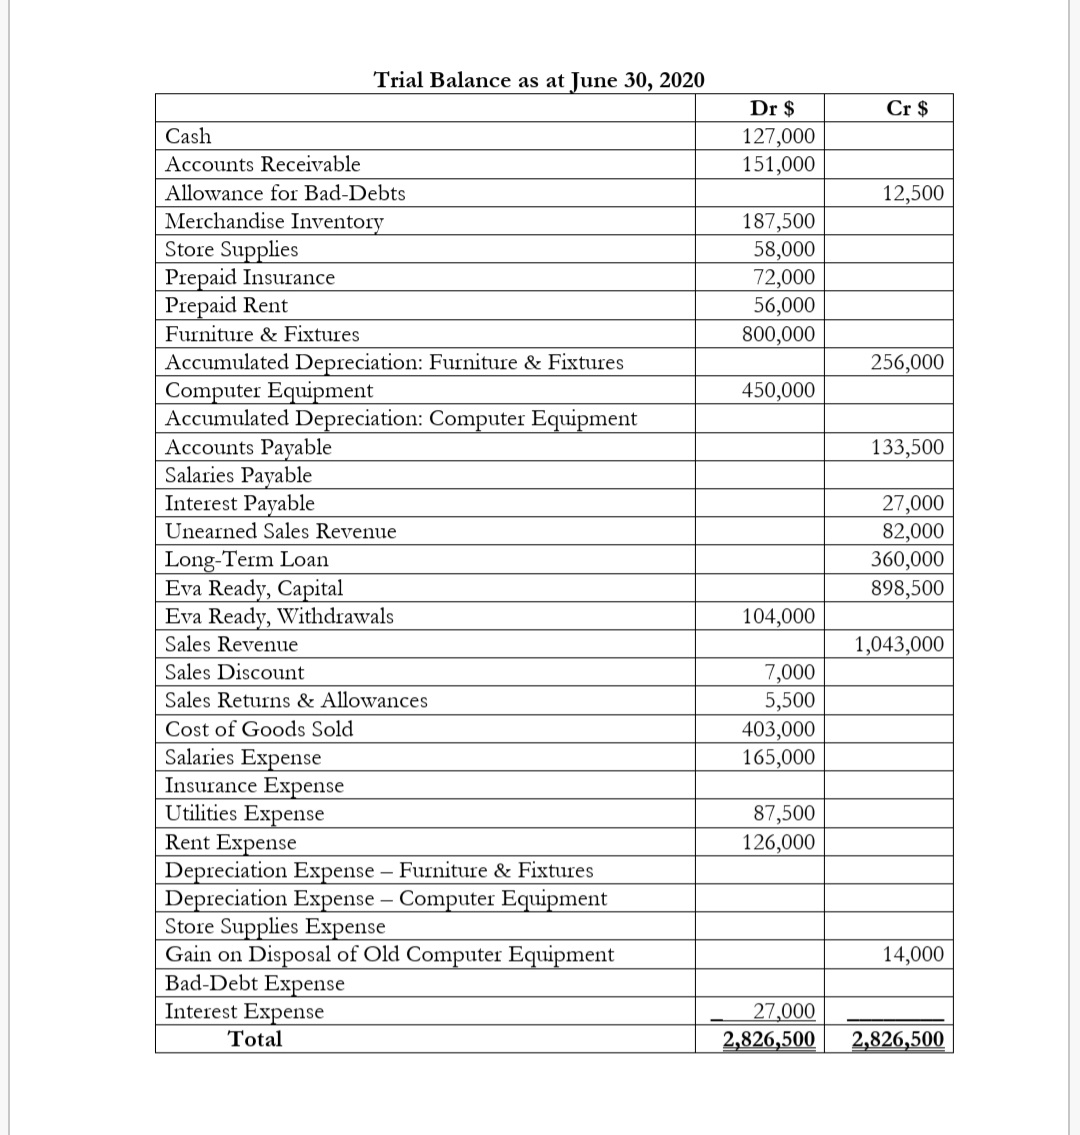 Trial Balance as at June 30, 2020
Dr $
Cr $
127,000
151,000
Cash
Accounts Receivable
Allowance for Bad-Debts
12,500
Merchandise Inventory
Store Supplies
Prepaid Insurance
Prepaid Rent
Furniture & Fixtures
187,500
58,000
72,000
56,000
800,000
Accumulated Depreciation: Furniture & Fixtures
Computer Equipment
Accumulated Depreciation: Computer Equipment
Accounts Payable
Salaries Payable
Interest Payable
256,000
450,000
133,500
27,000
82,000
360,000
Unearned Sales Revenue
Long-Term Loan
Eva Ready, Capital
Eva Ready, Withdrawals
Sales Revenue
898,500
104,000
1,043,000
Sales Discount
7,000
5,500
Sales Returns & Allowances
Cost of Goods Sold
403,000
165,000
Salaries Expense
Insurance Expense
Utilities Expense
Rent Expense
Depreciation Expense – Furniture & Fixtures
Depreciation Expense – Computer Equipment
Store Supplies Expense
Gain on Disposal of Old Computer Equipment
Bad-Debt Expense
Interest Expense
87,500
126,000
14,000
27,000
Total
2,826,500
2,826,500
